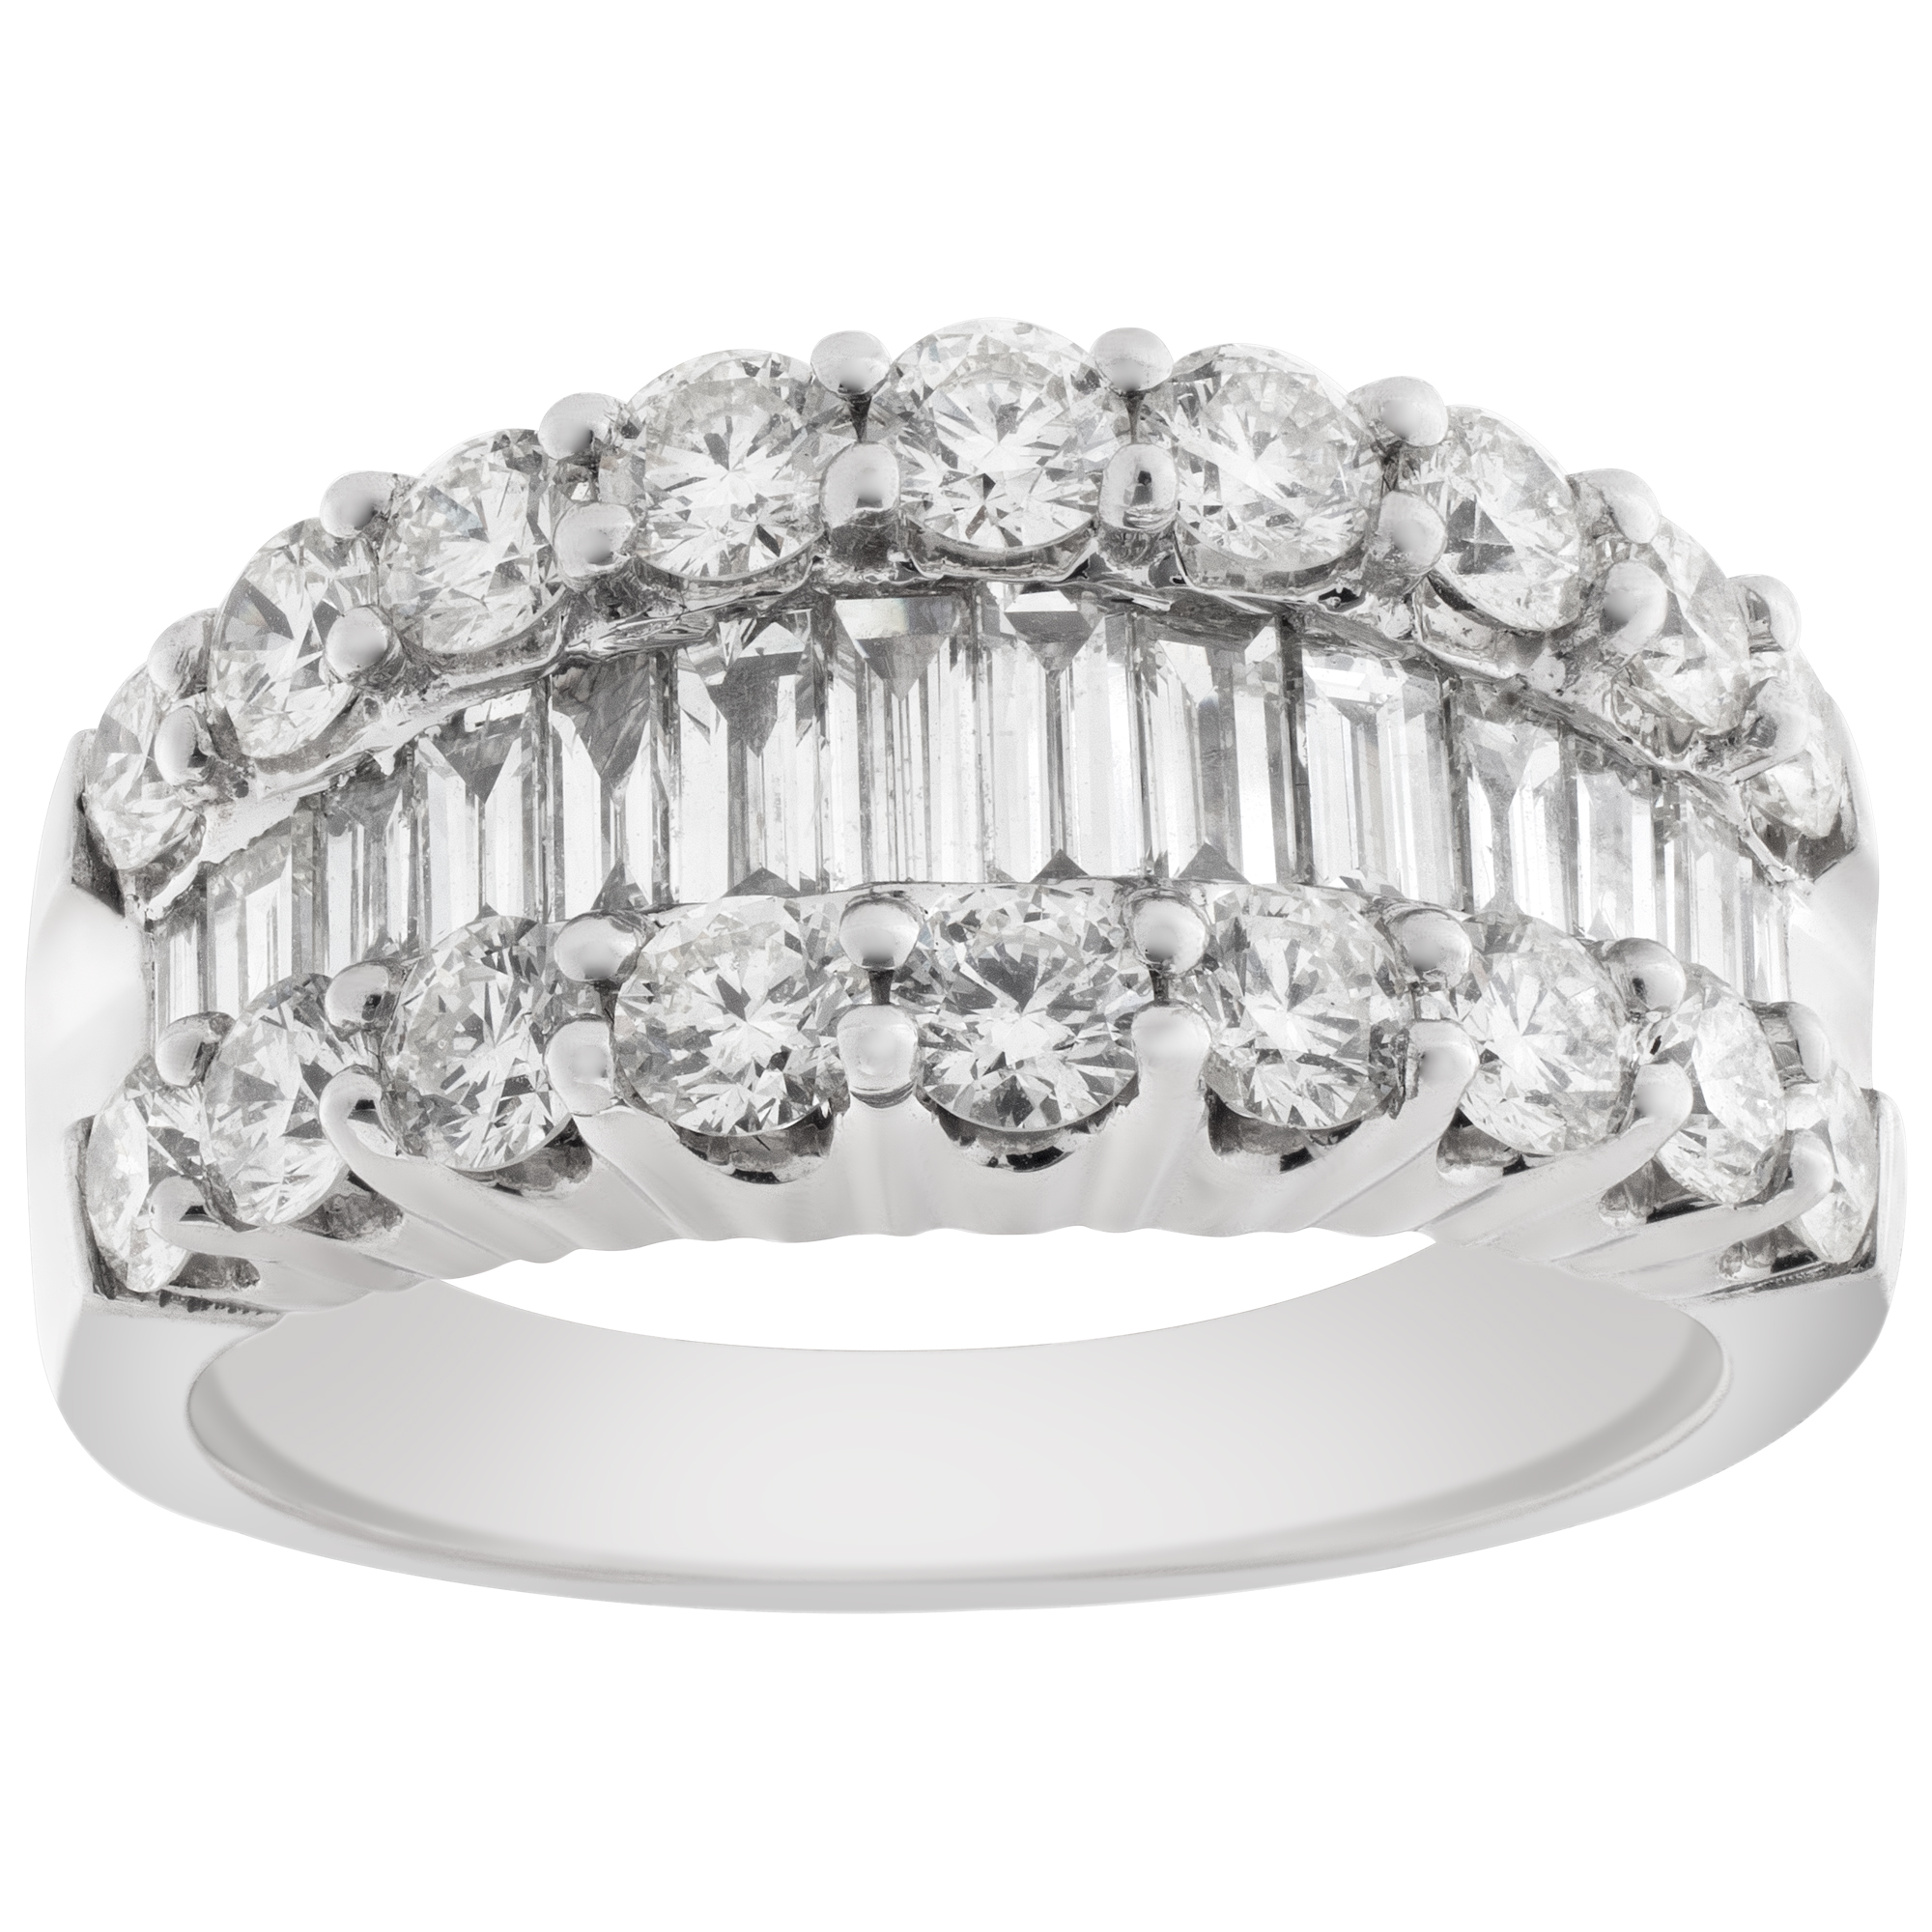 Ladies ring in 14k white gold with 2.81cts in round and baguette diamonds